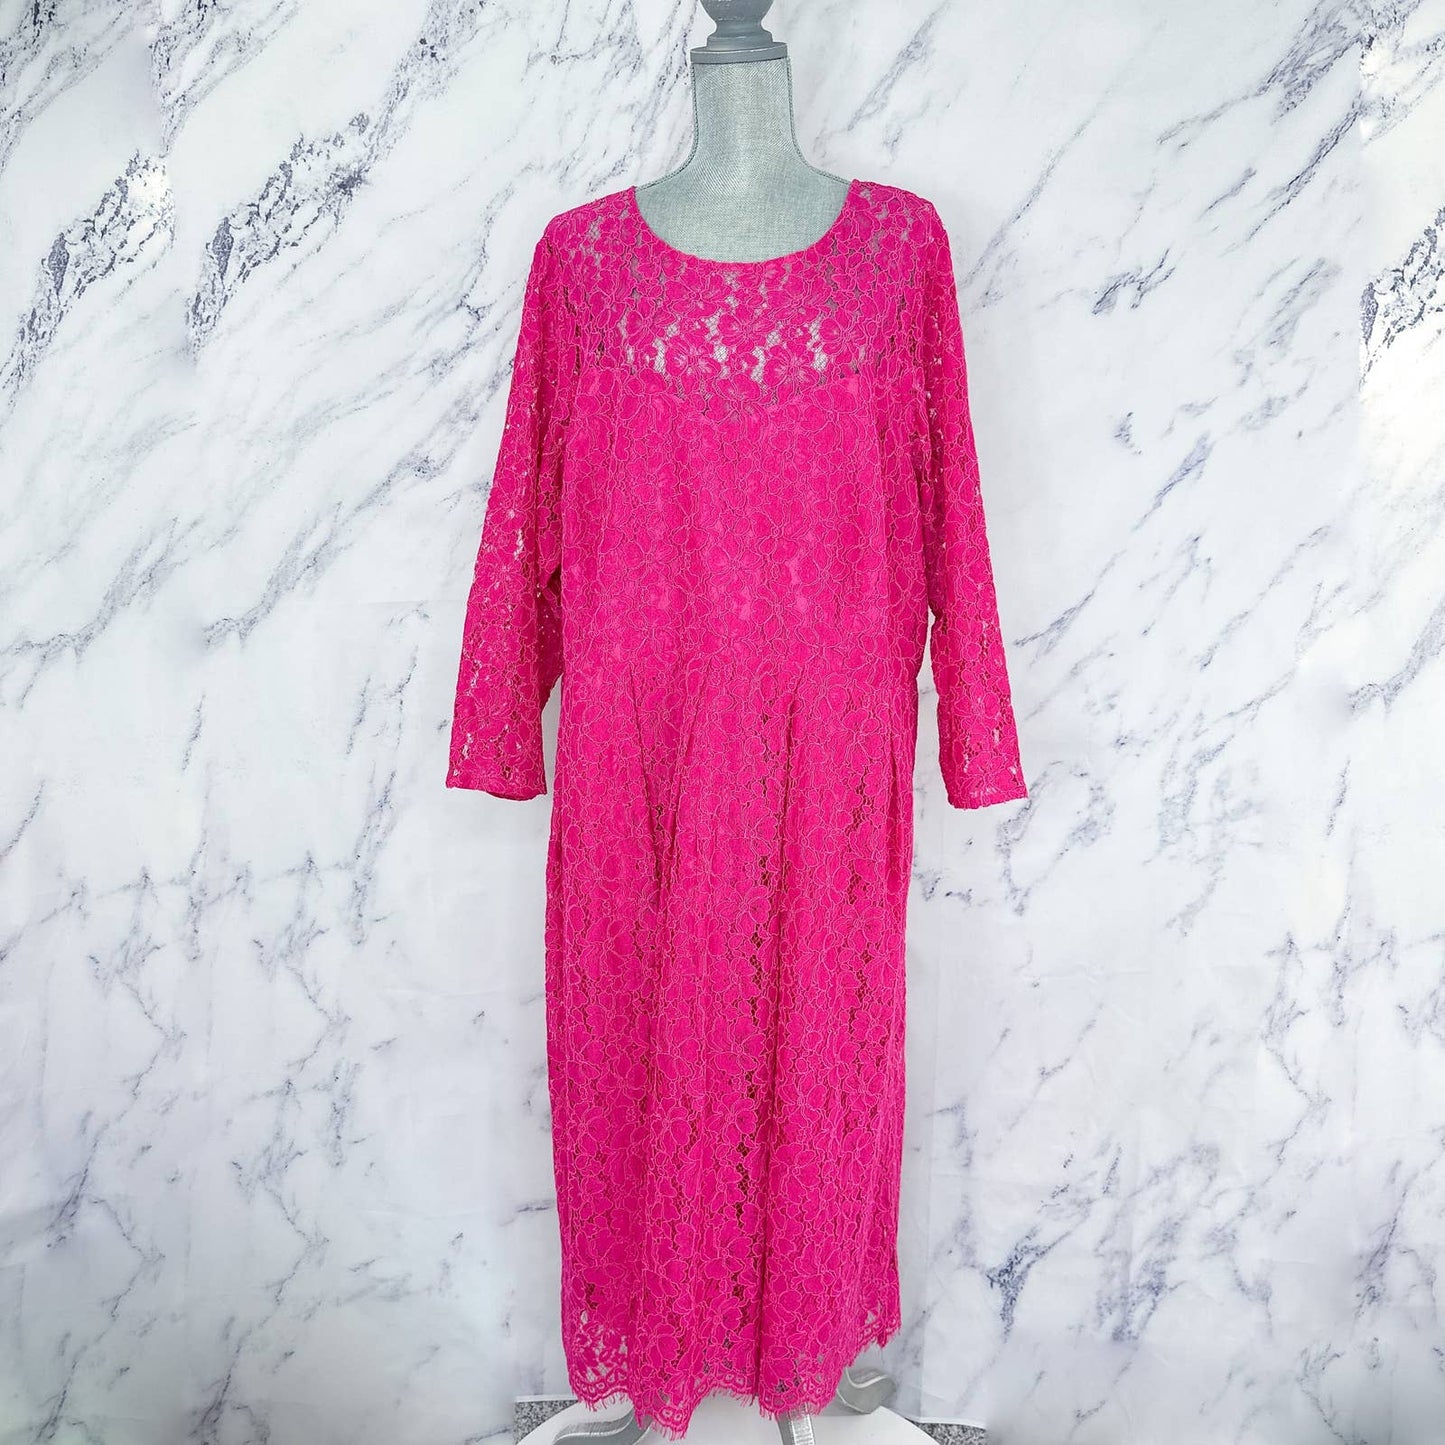 Eloquii | Pink Lace Fit and Flare Dress | Sz 24